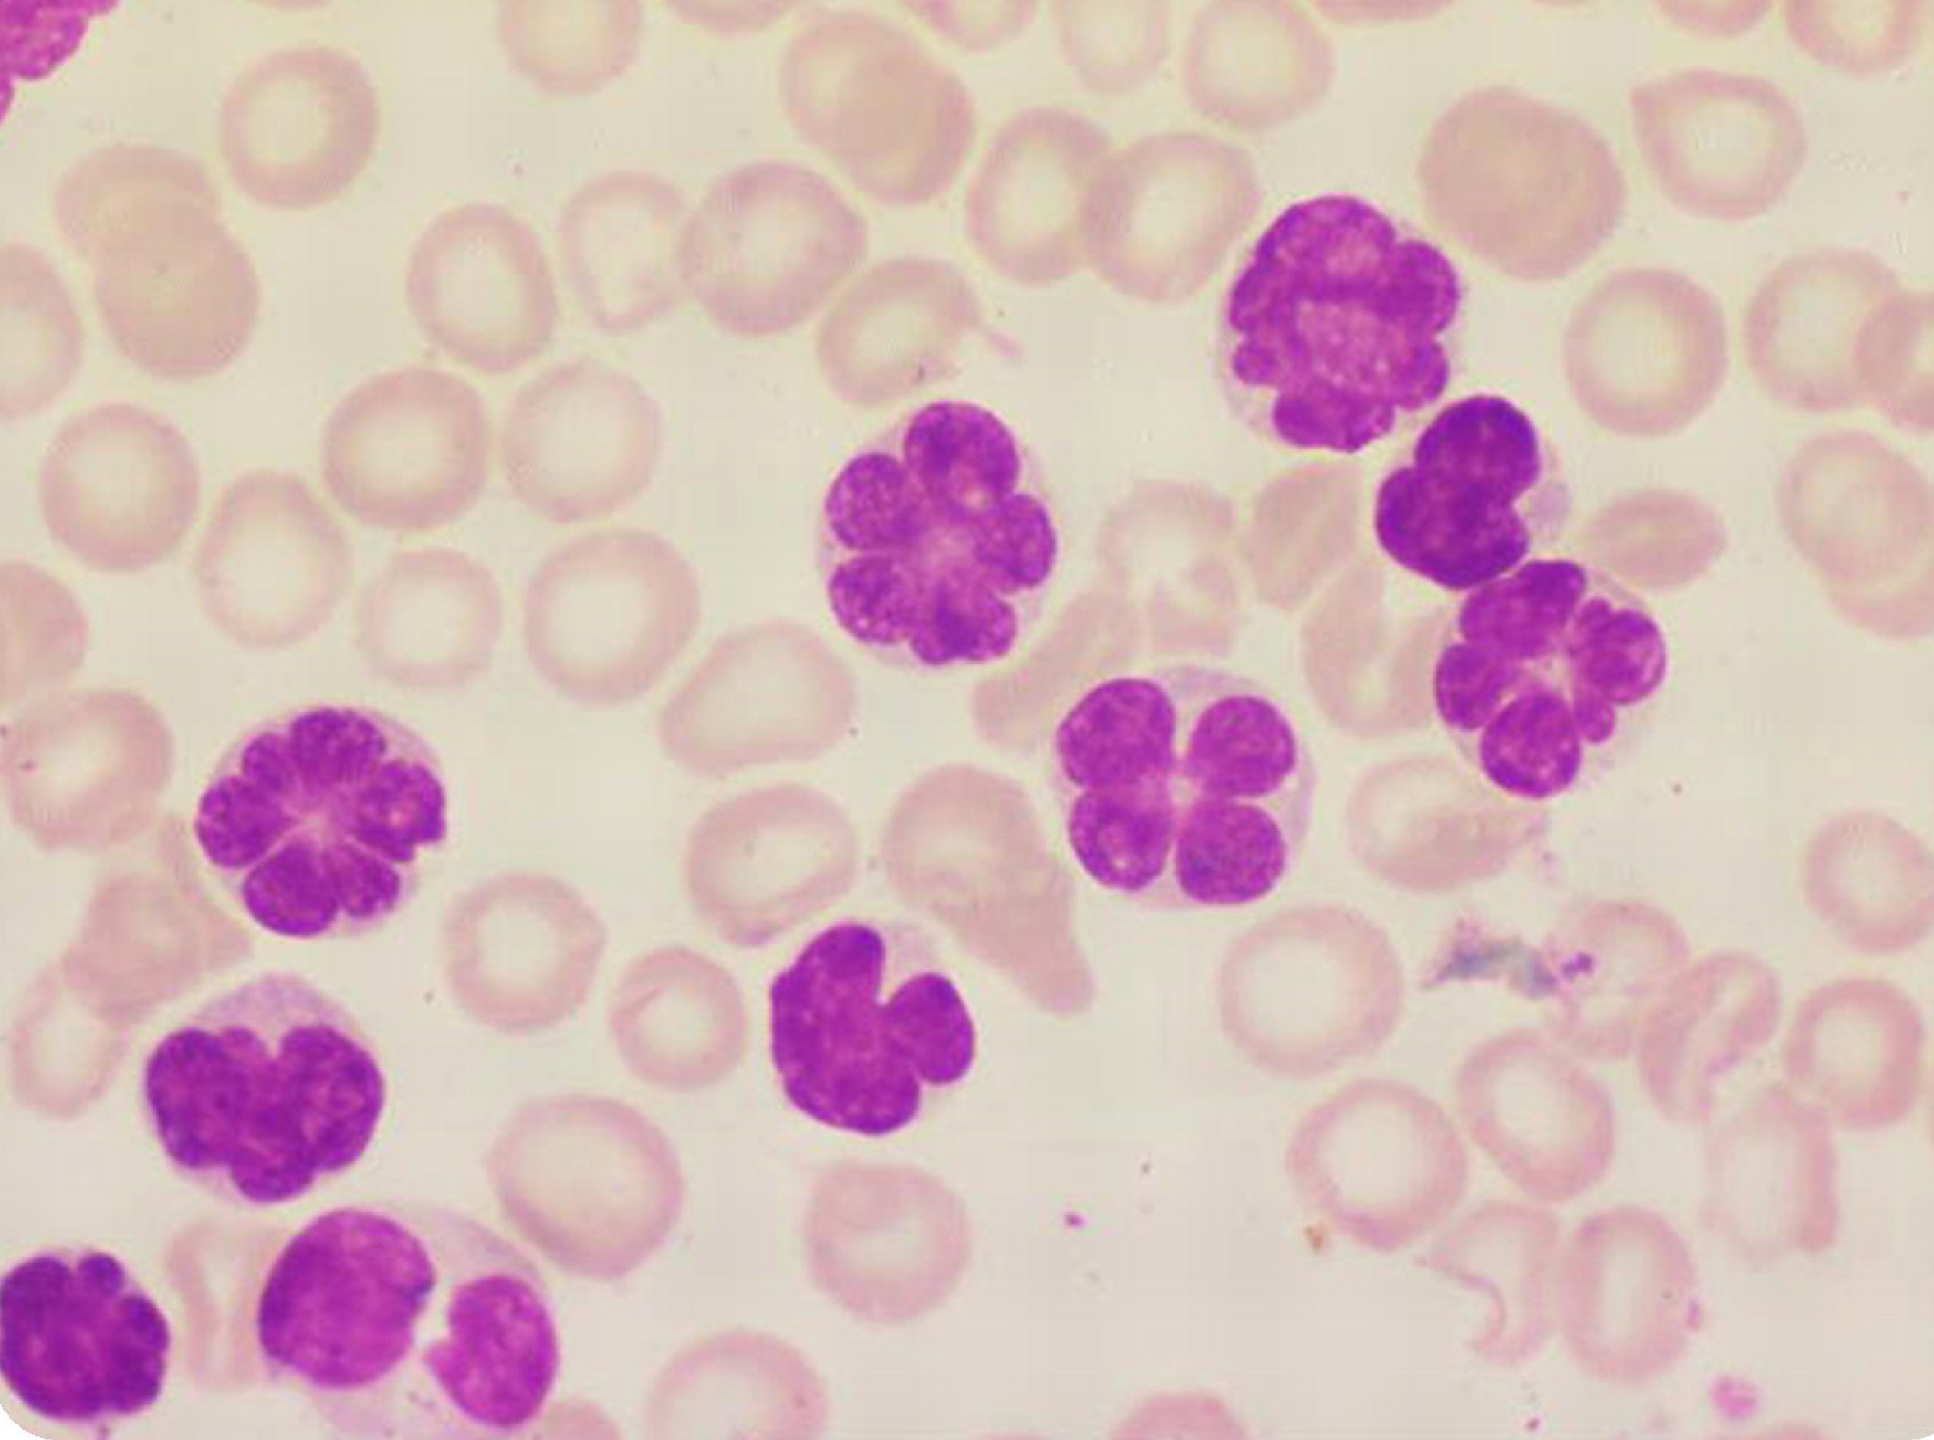 HTLV-1 leukaemic cells: Once the infected T-cells are infected and progress to leukaemia they are often called ‘flower cells’ due to their shape (Image: Blood 2010; vol. 115, p.1668)